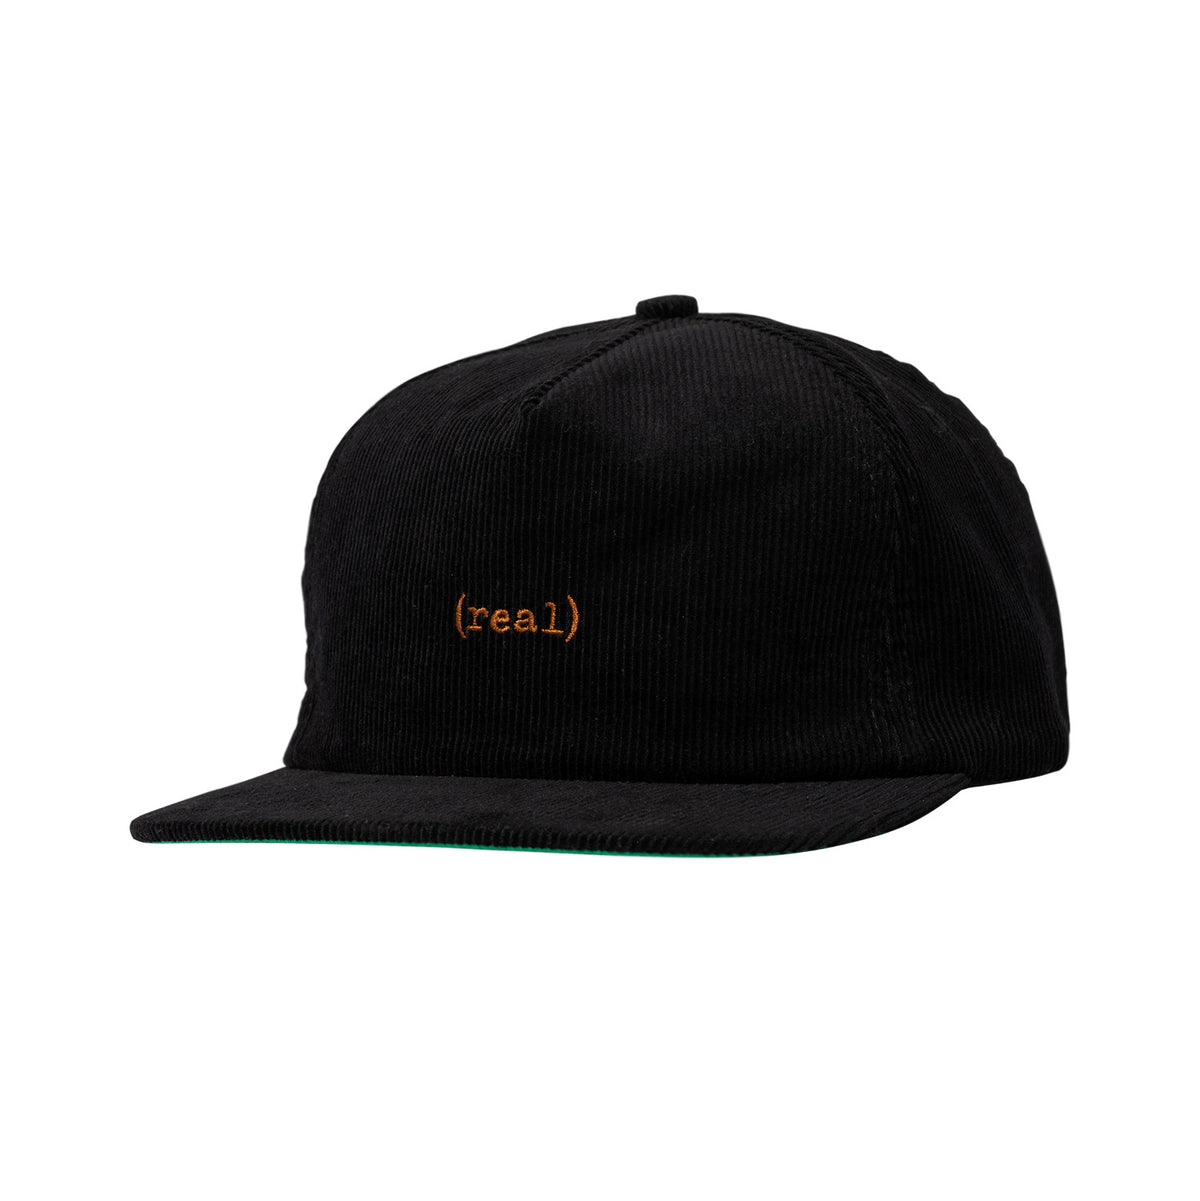 Real Lower Snapback Hat